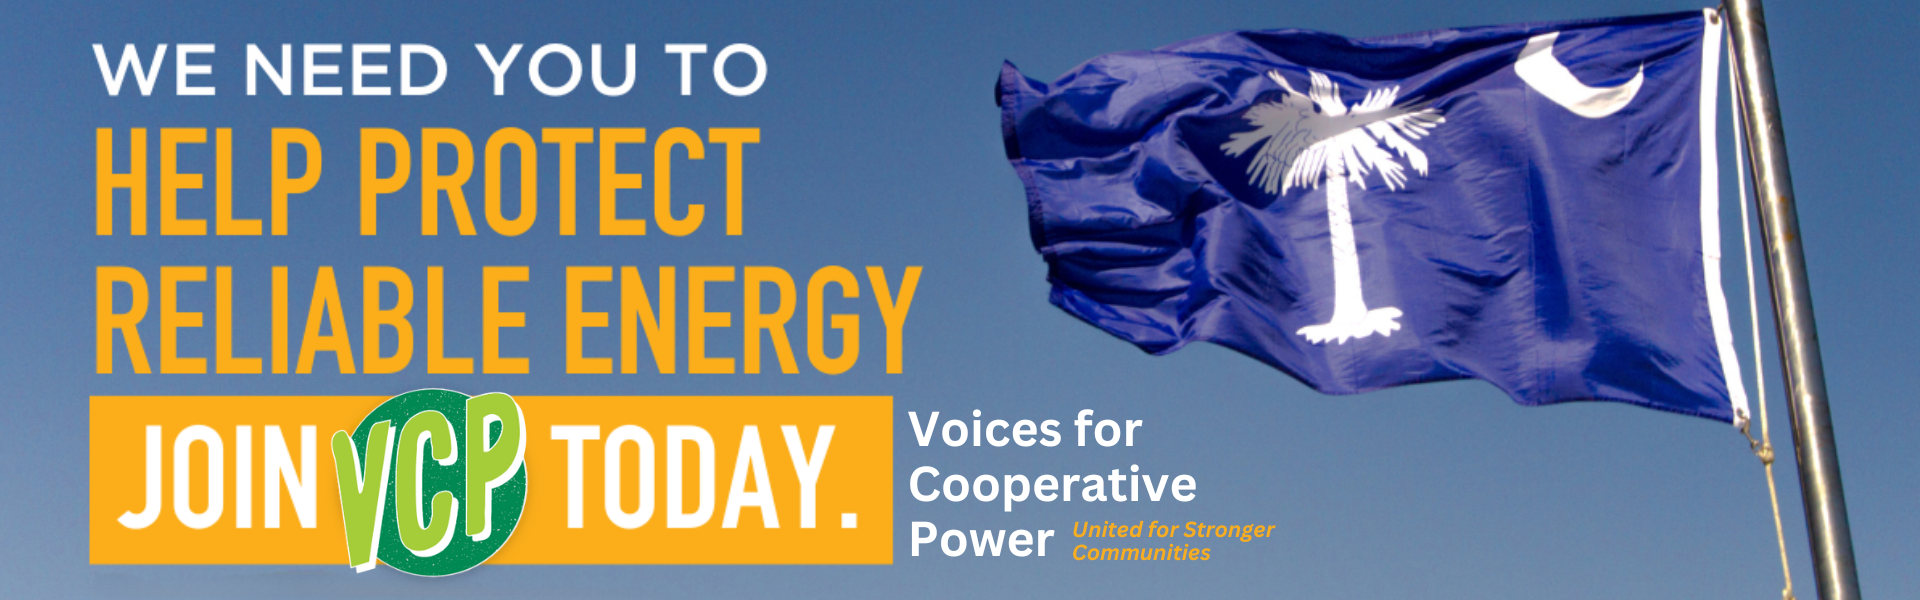 Voices for Cooperative Power